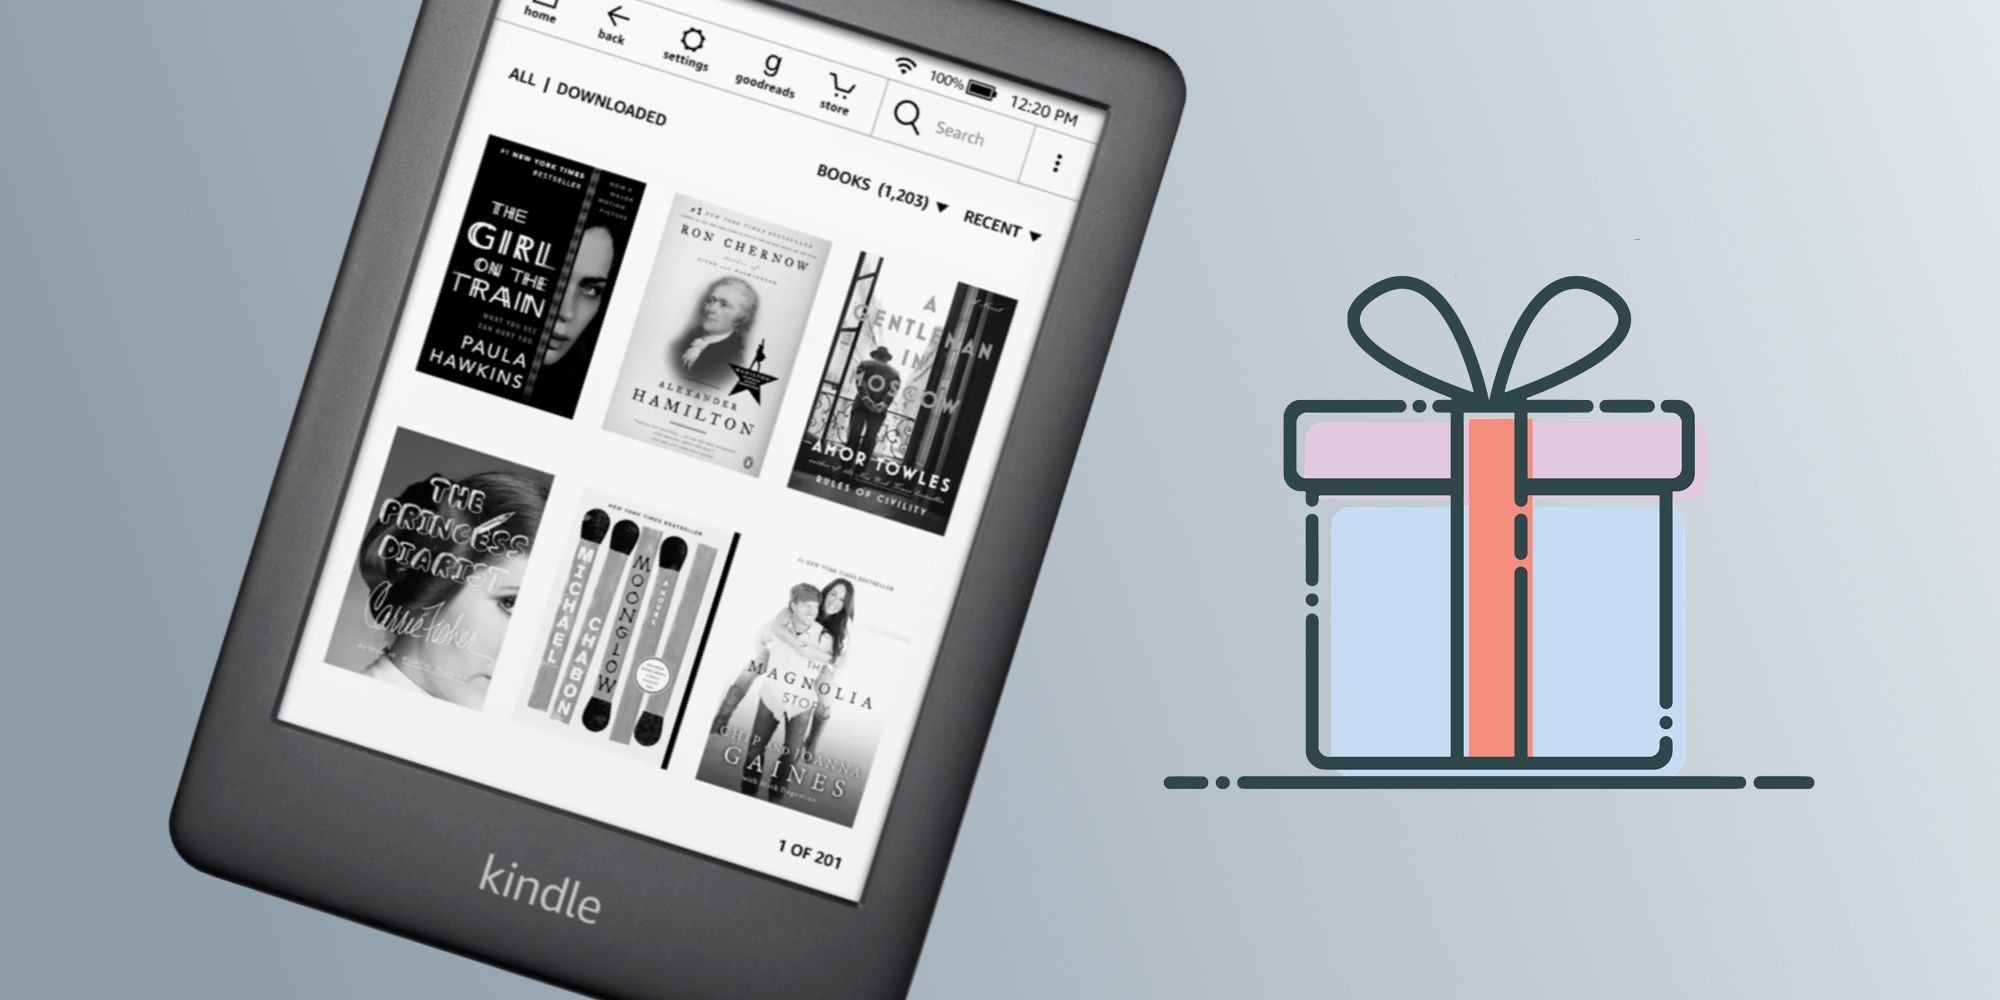 will no longer allow users to buy Kindle books on Android